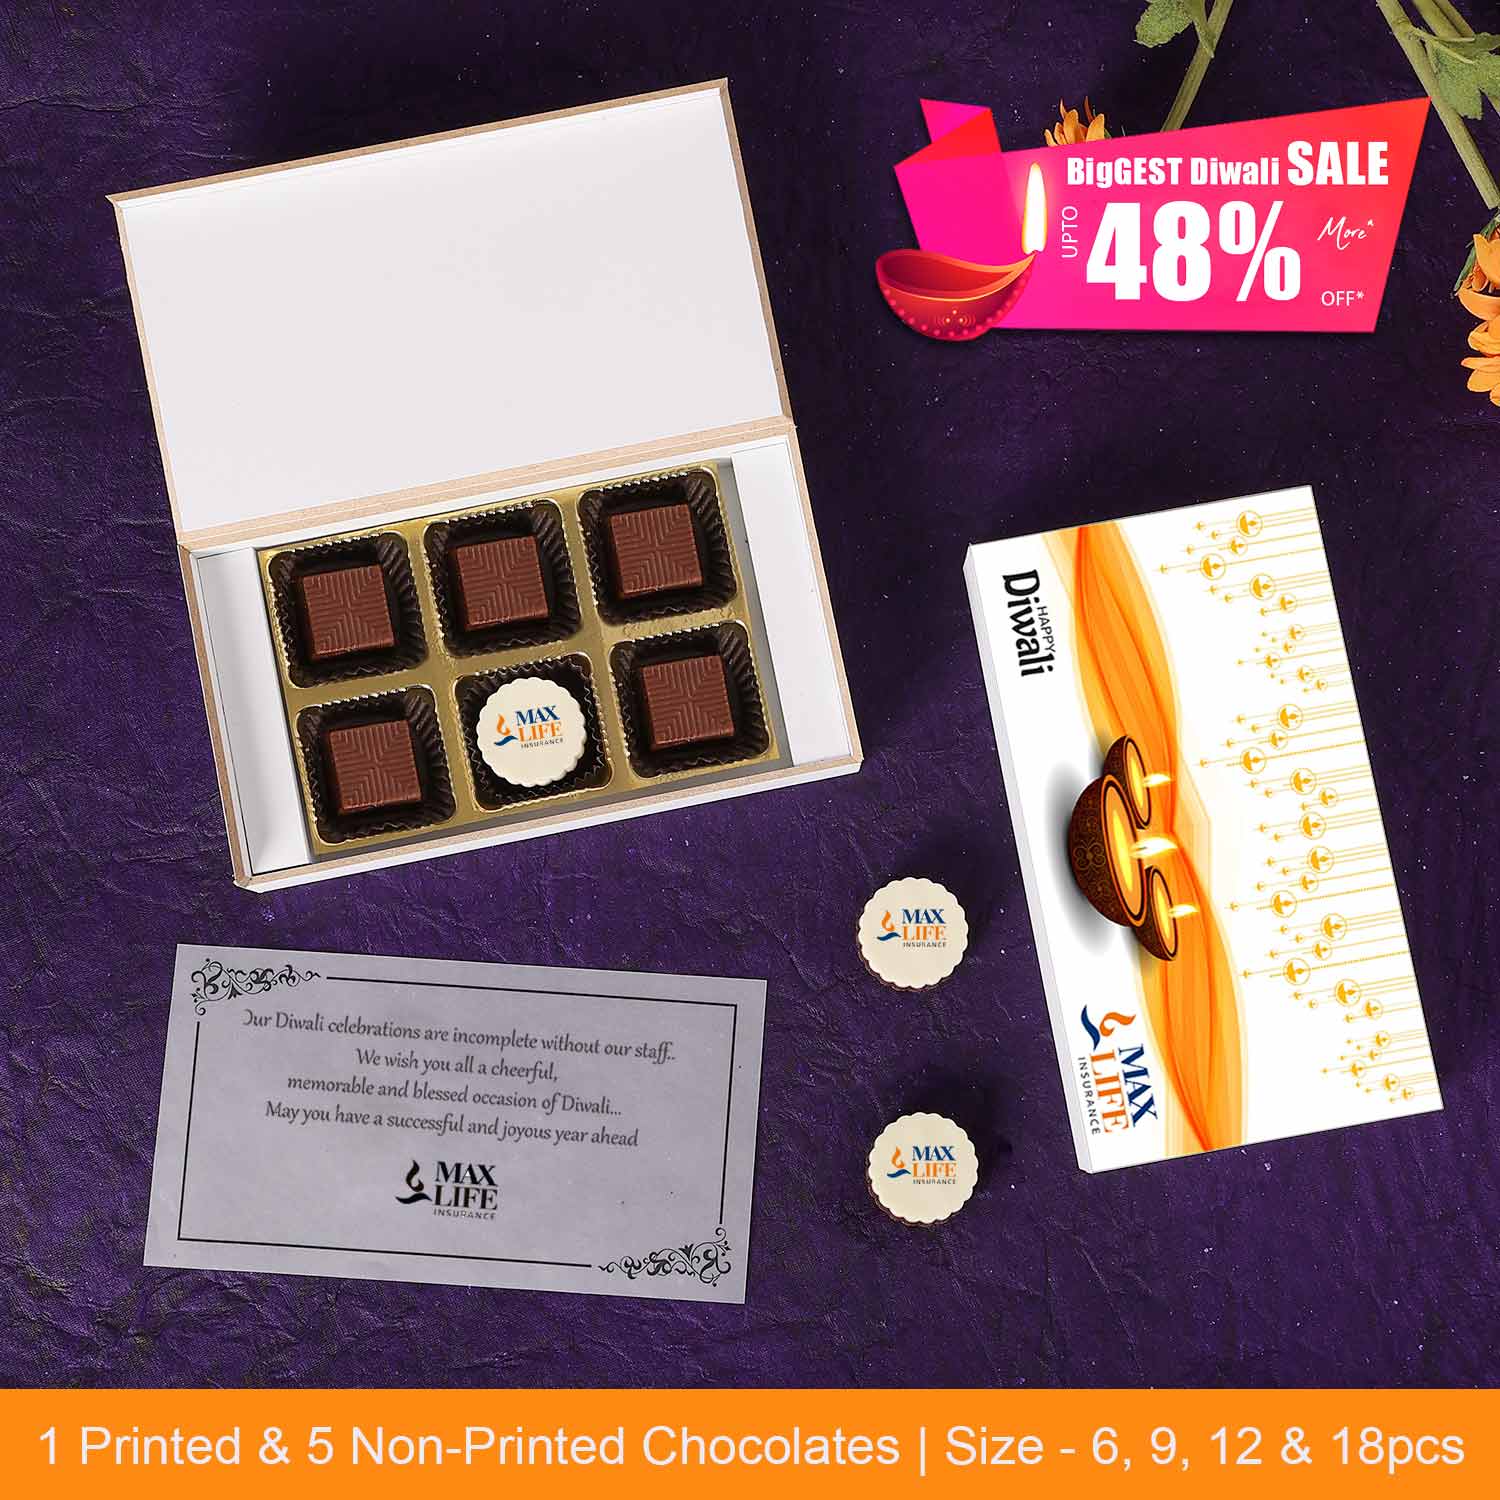 Buy chocolate online wholesale, corporate chocolate gift boxes, chocolate corporate gifts, chocolates gift basket, chocolates for gift